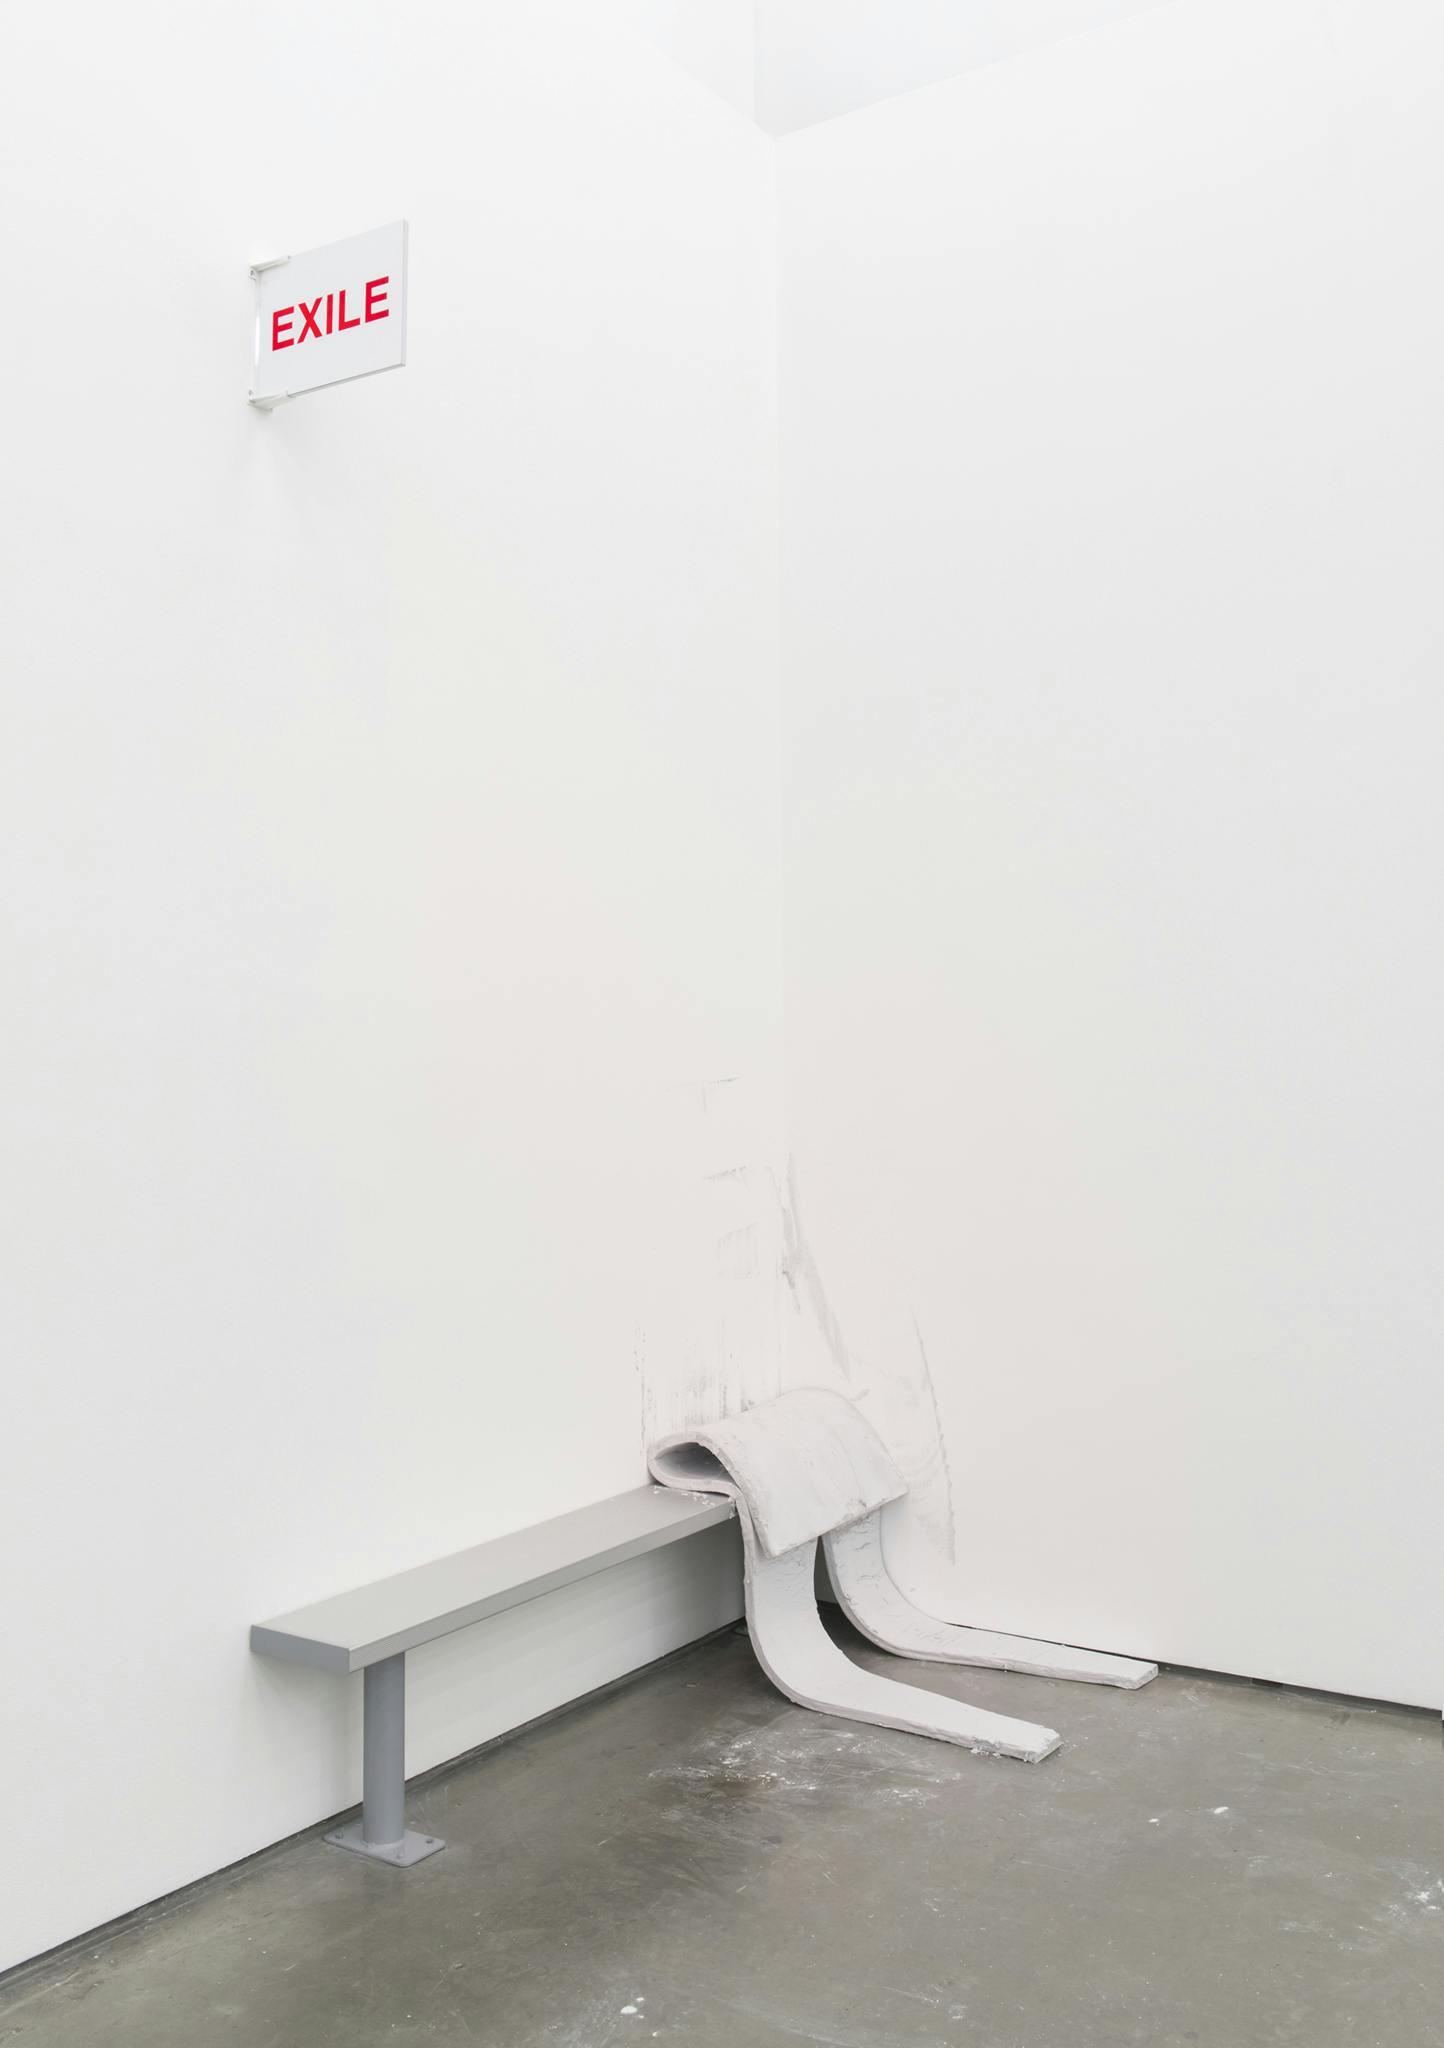 An aluminum bench is installed in the corner of a gallery. On it sits a thin, slumped foam cutout in a human-like form. An exit sign reading EXILE instead of exit hangs on the wall above.